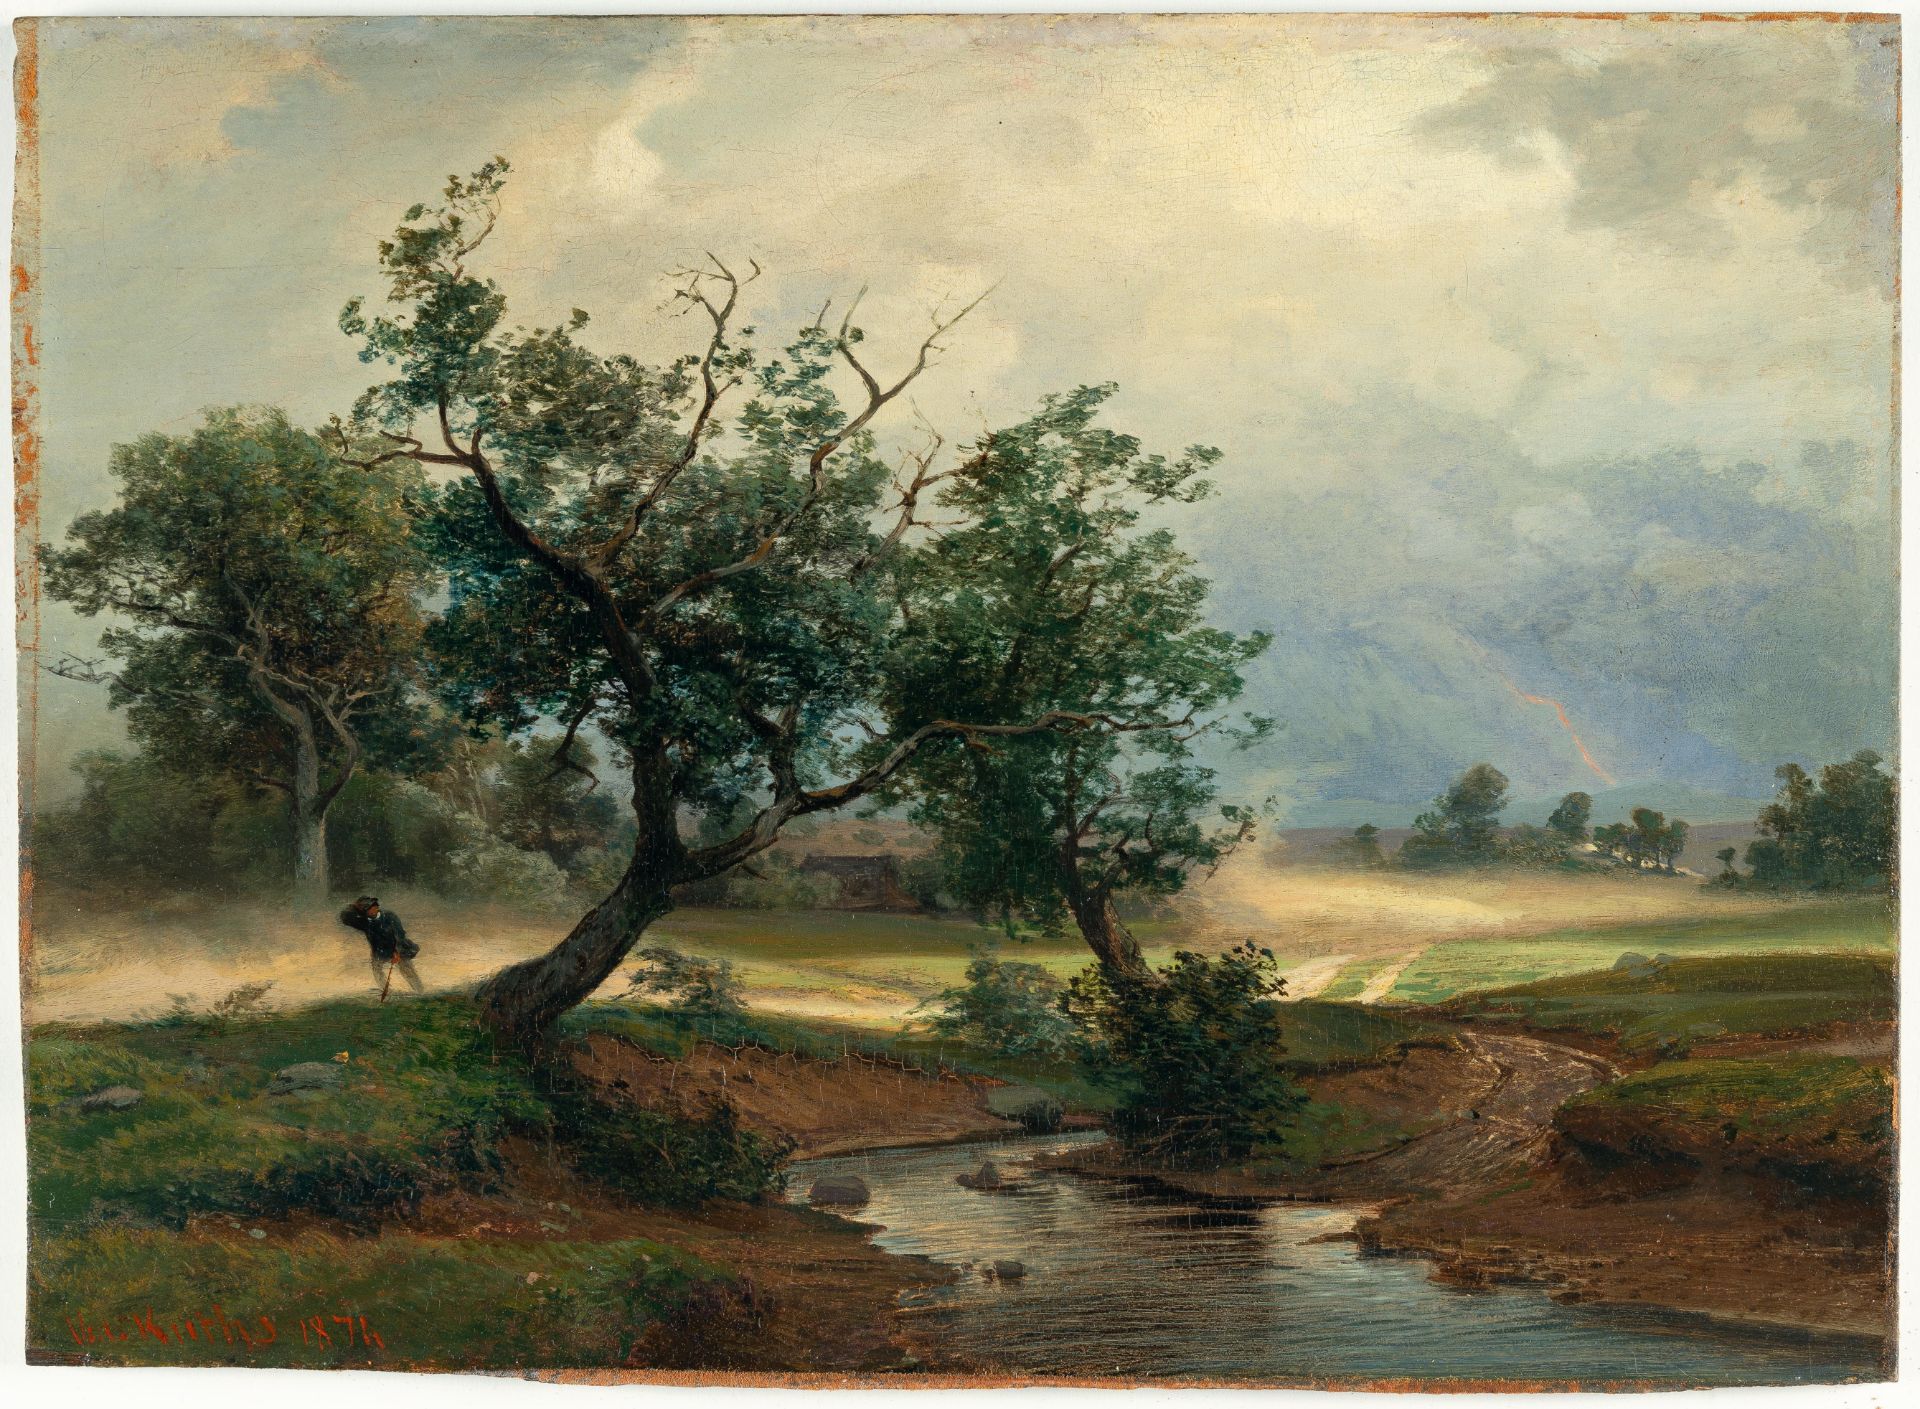 Valentin Ruths (1825 - Hamburg - 1905) – Landscape with approaching thunderstorm.Oil on panel. 1874. - Image 2 of 4